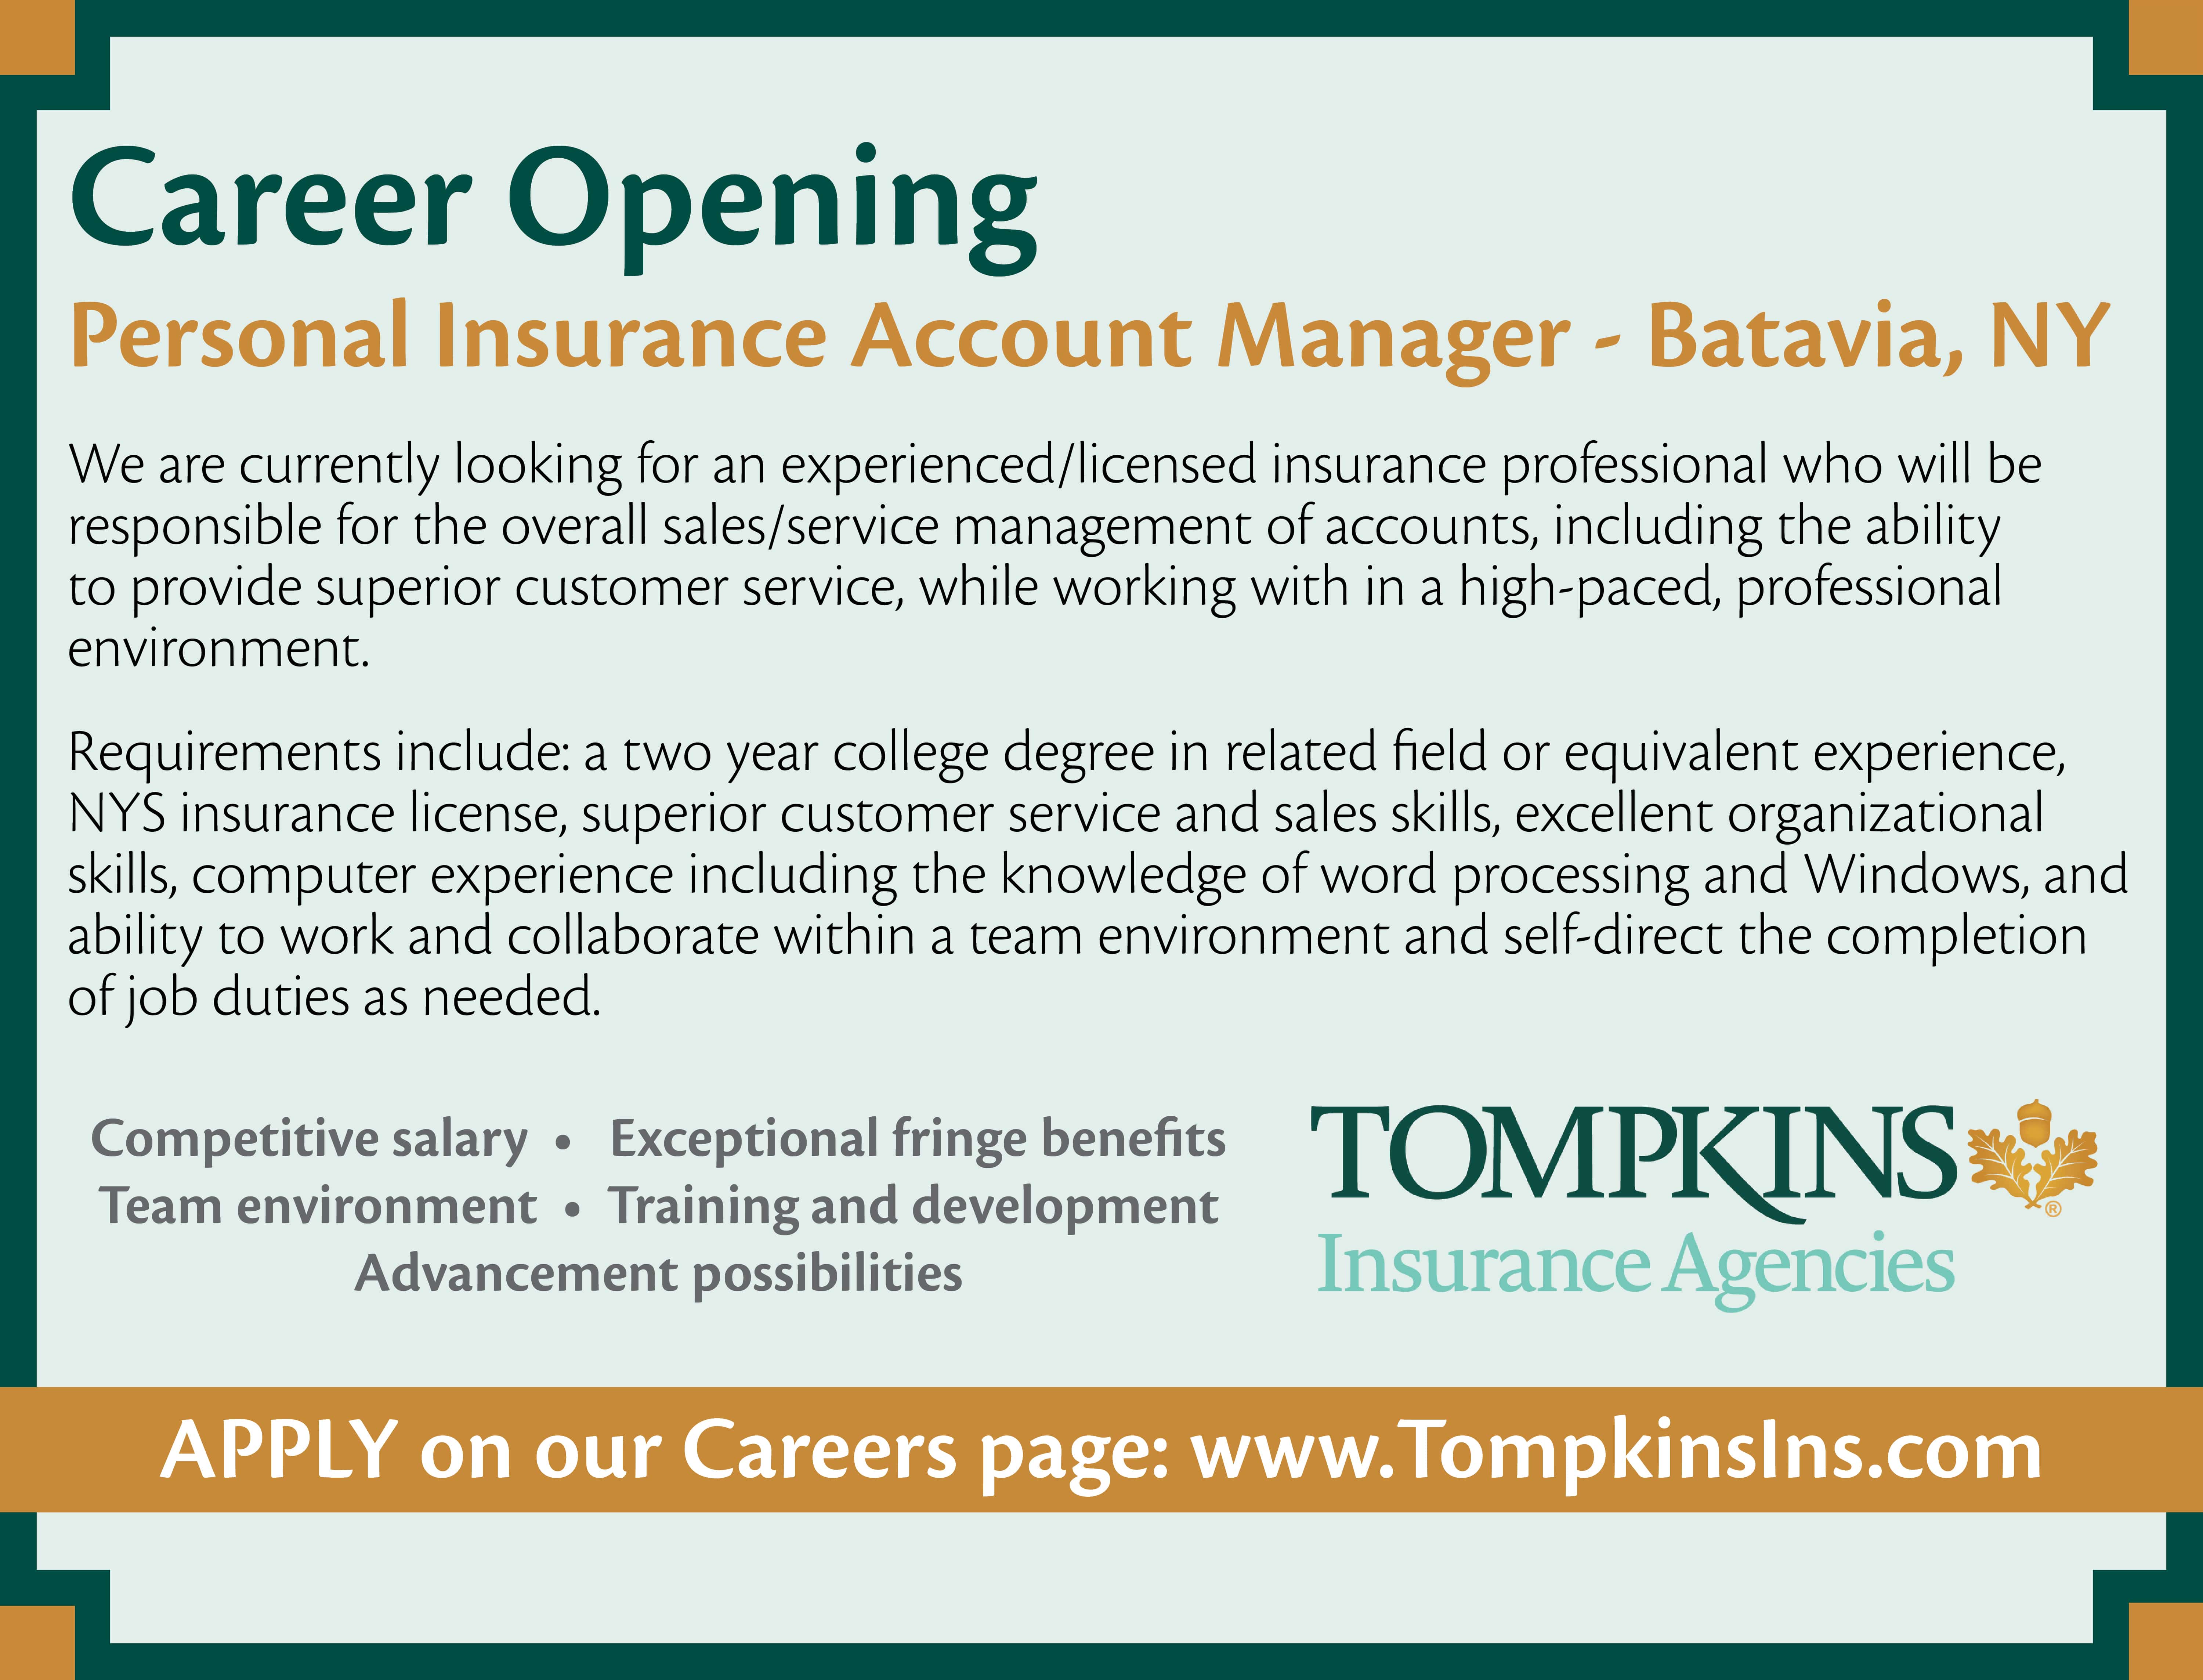 Career Opening - Personal Insurance Account Manager